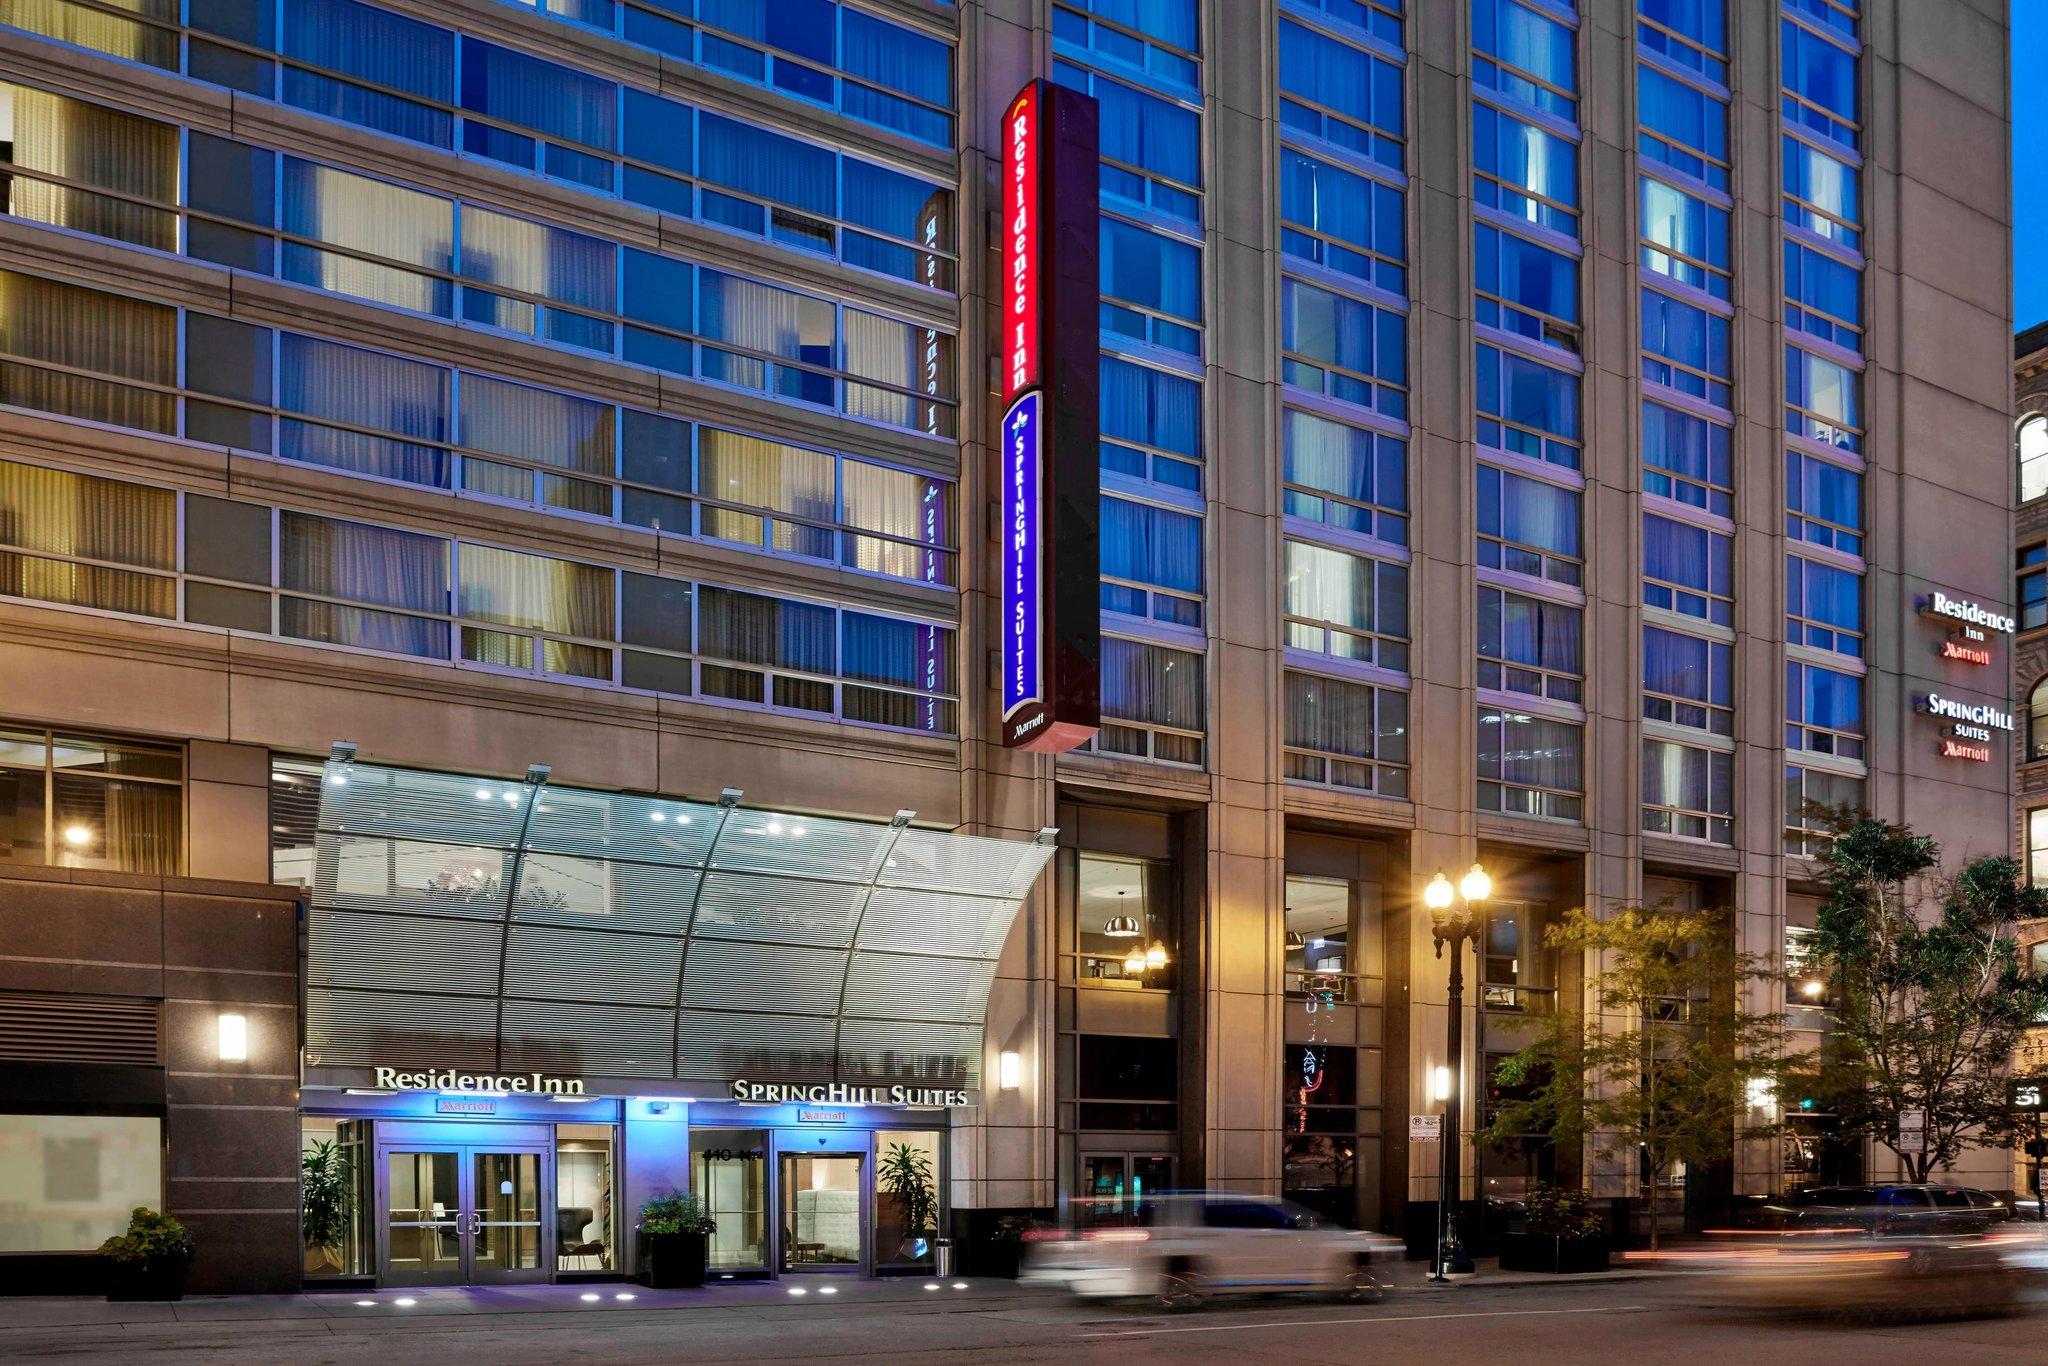 SpringHill Suites Chicago Downtown/River North in Chicago, IL